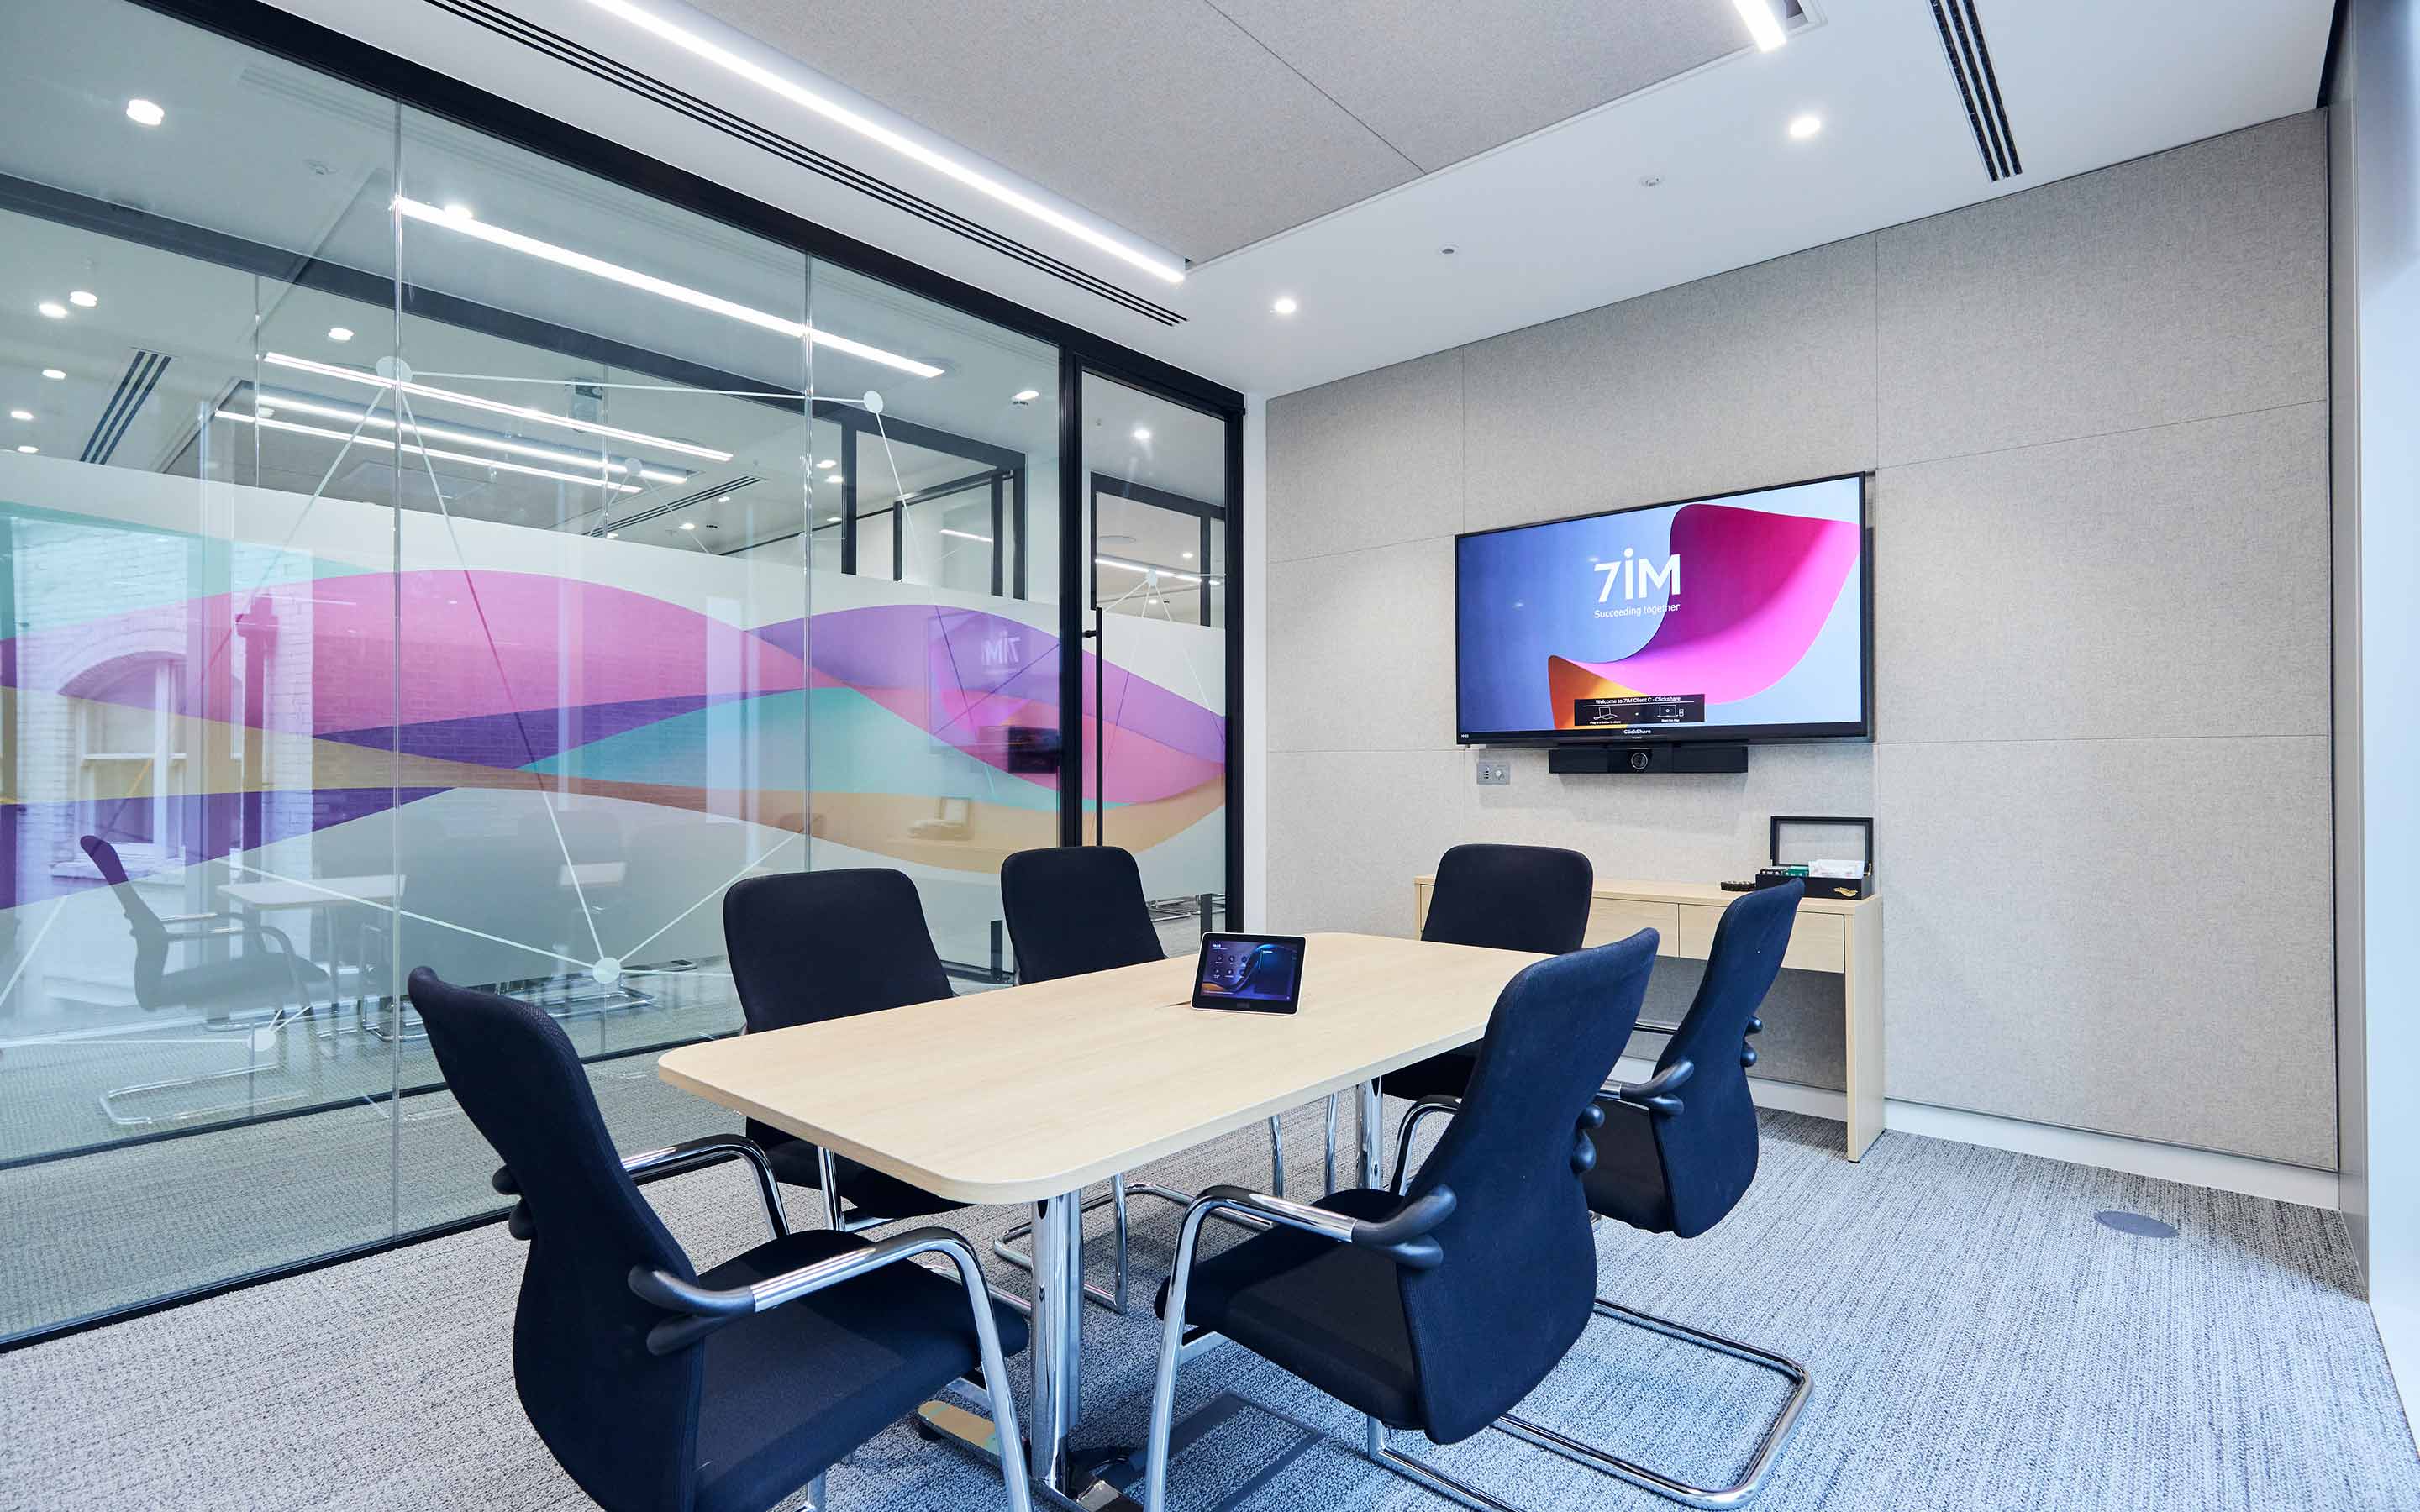 The image shows a meeting room with acoustic panelling, and glass walls